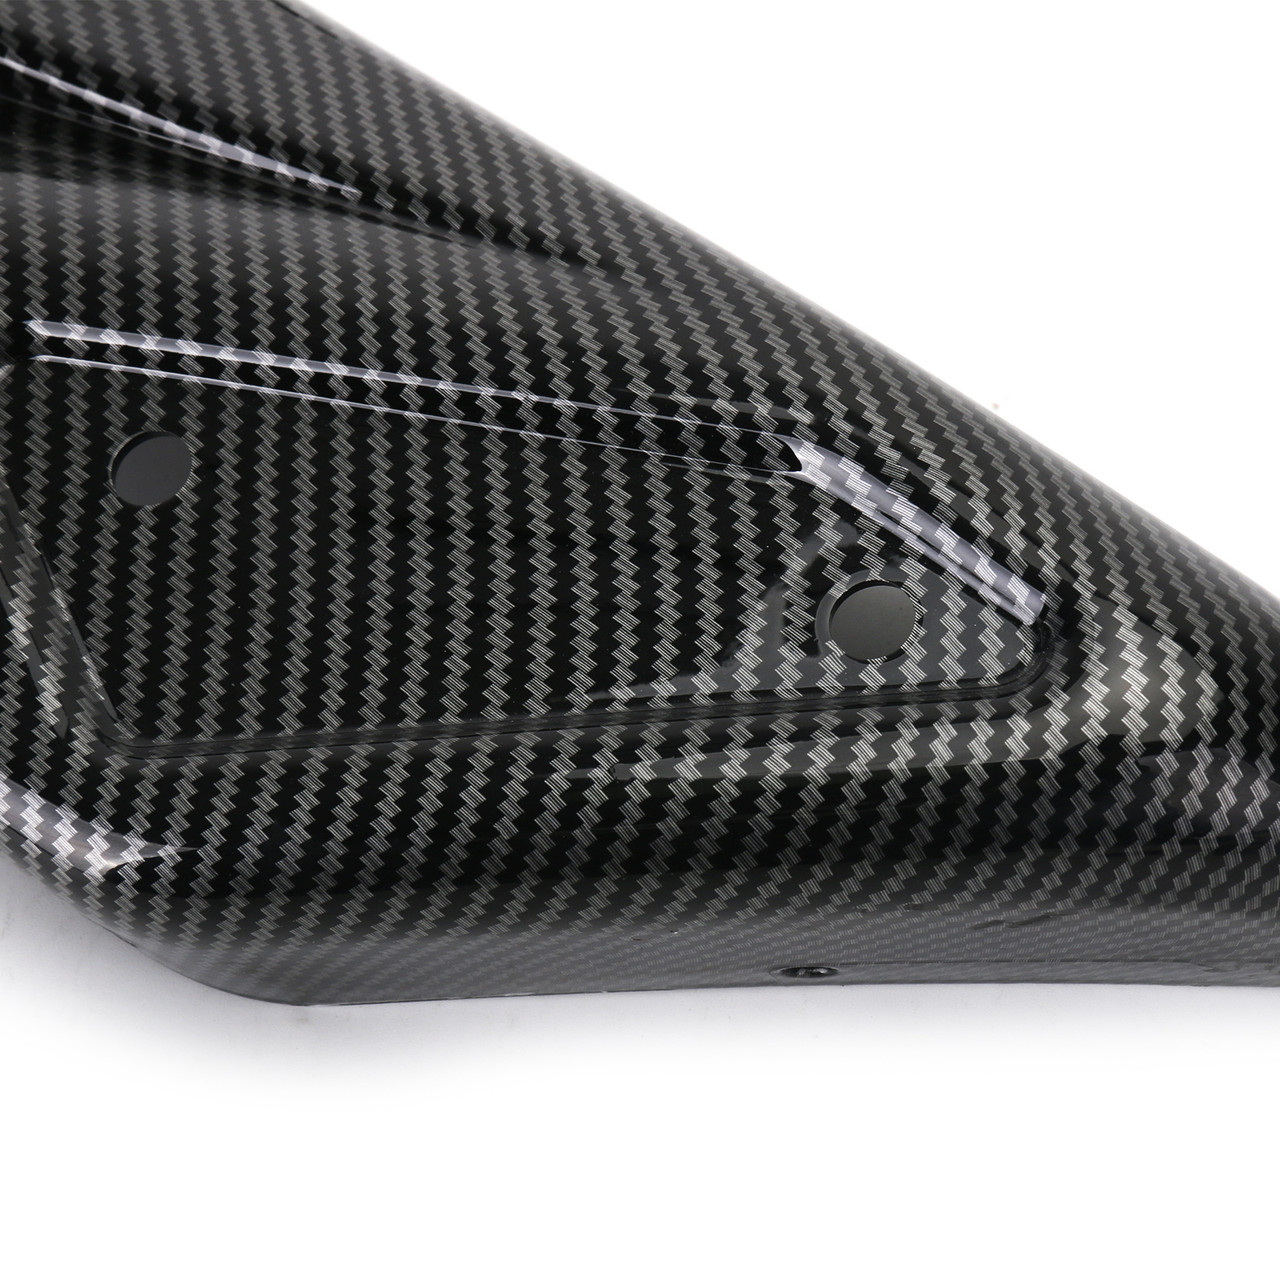 Lower Cowling Cover Fairing Fit For Kawasaki Z900RS 2018+ Carbon